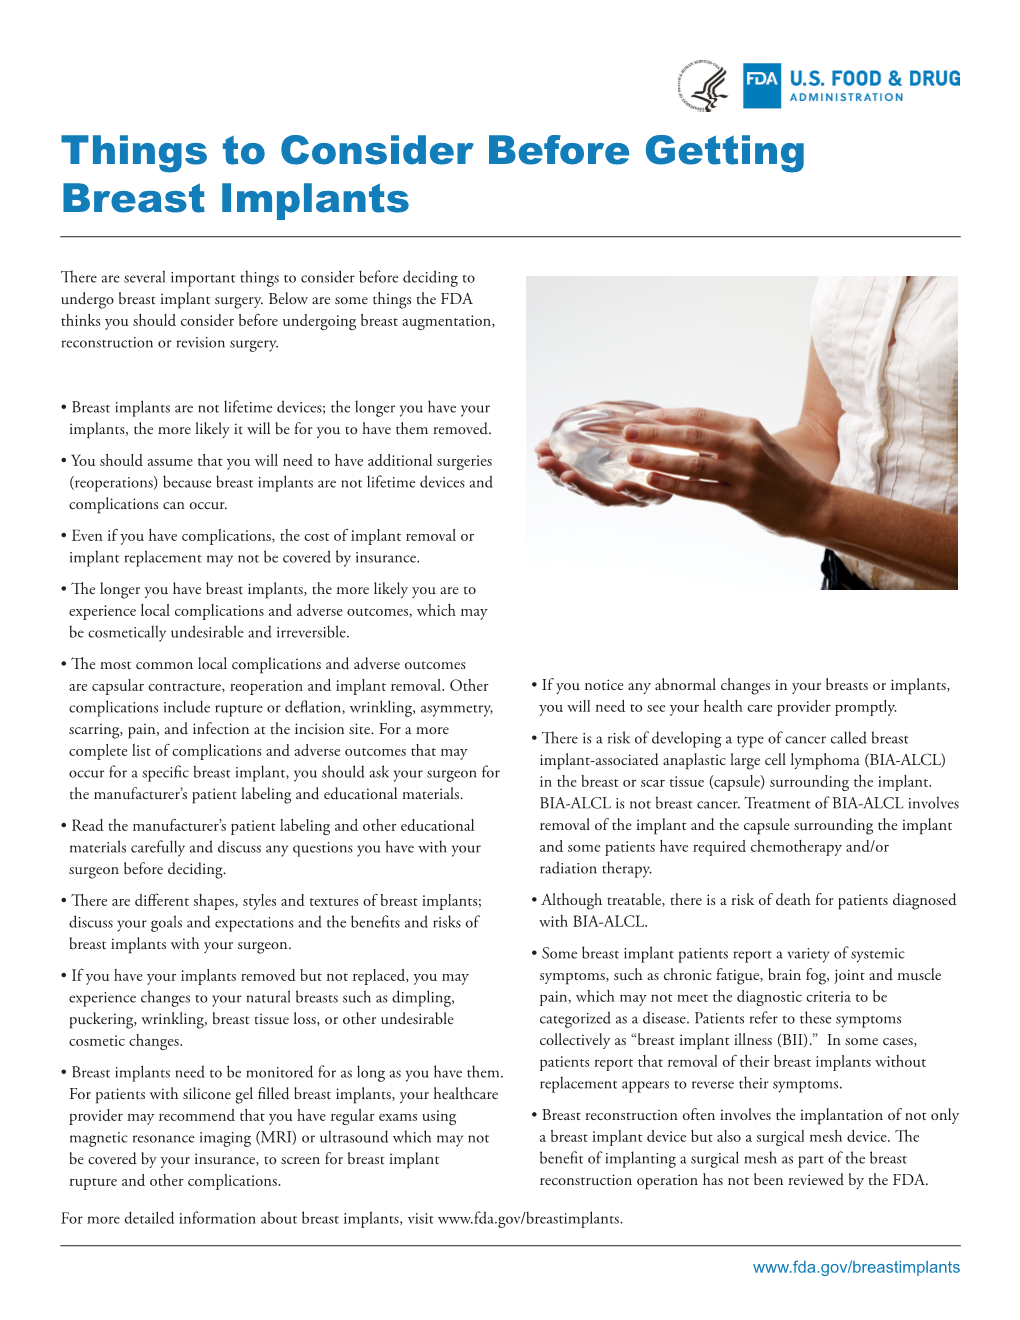 Things to Consider Before Getting Breast Implants